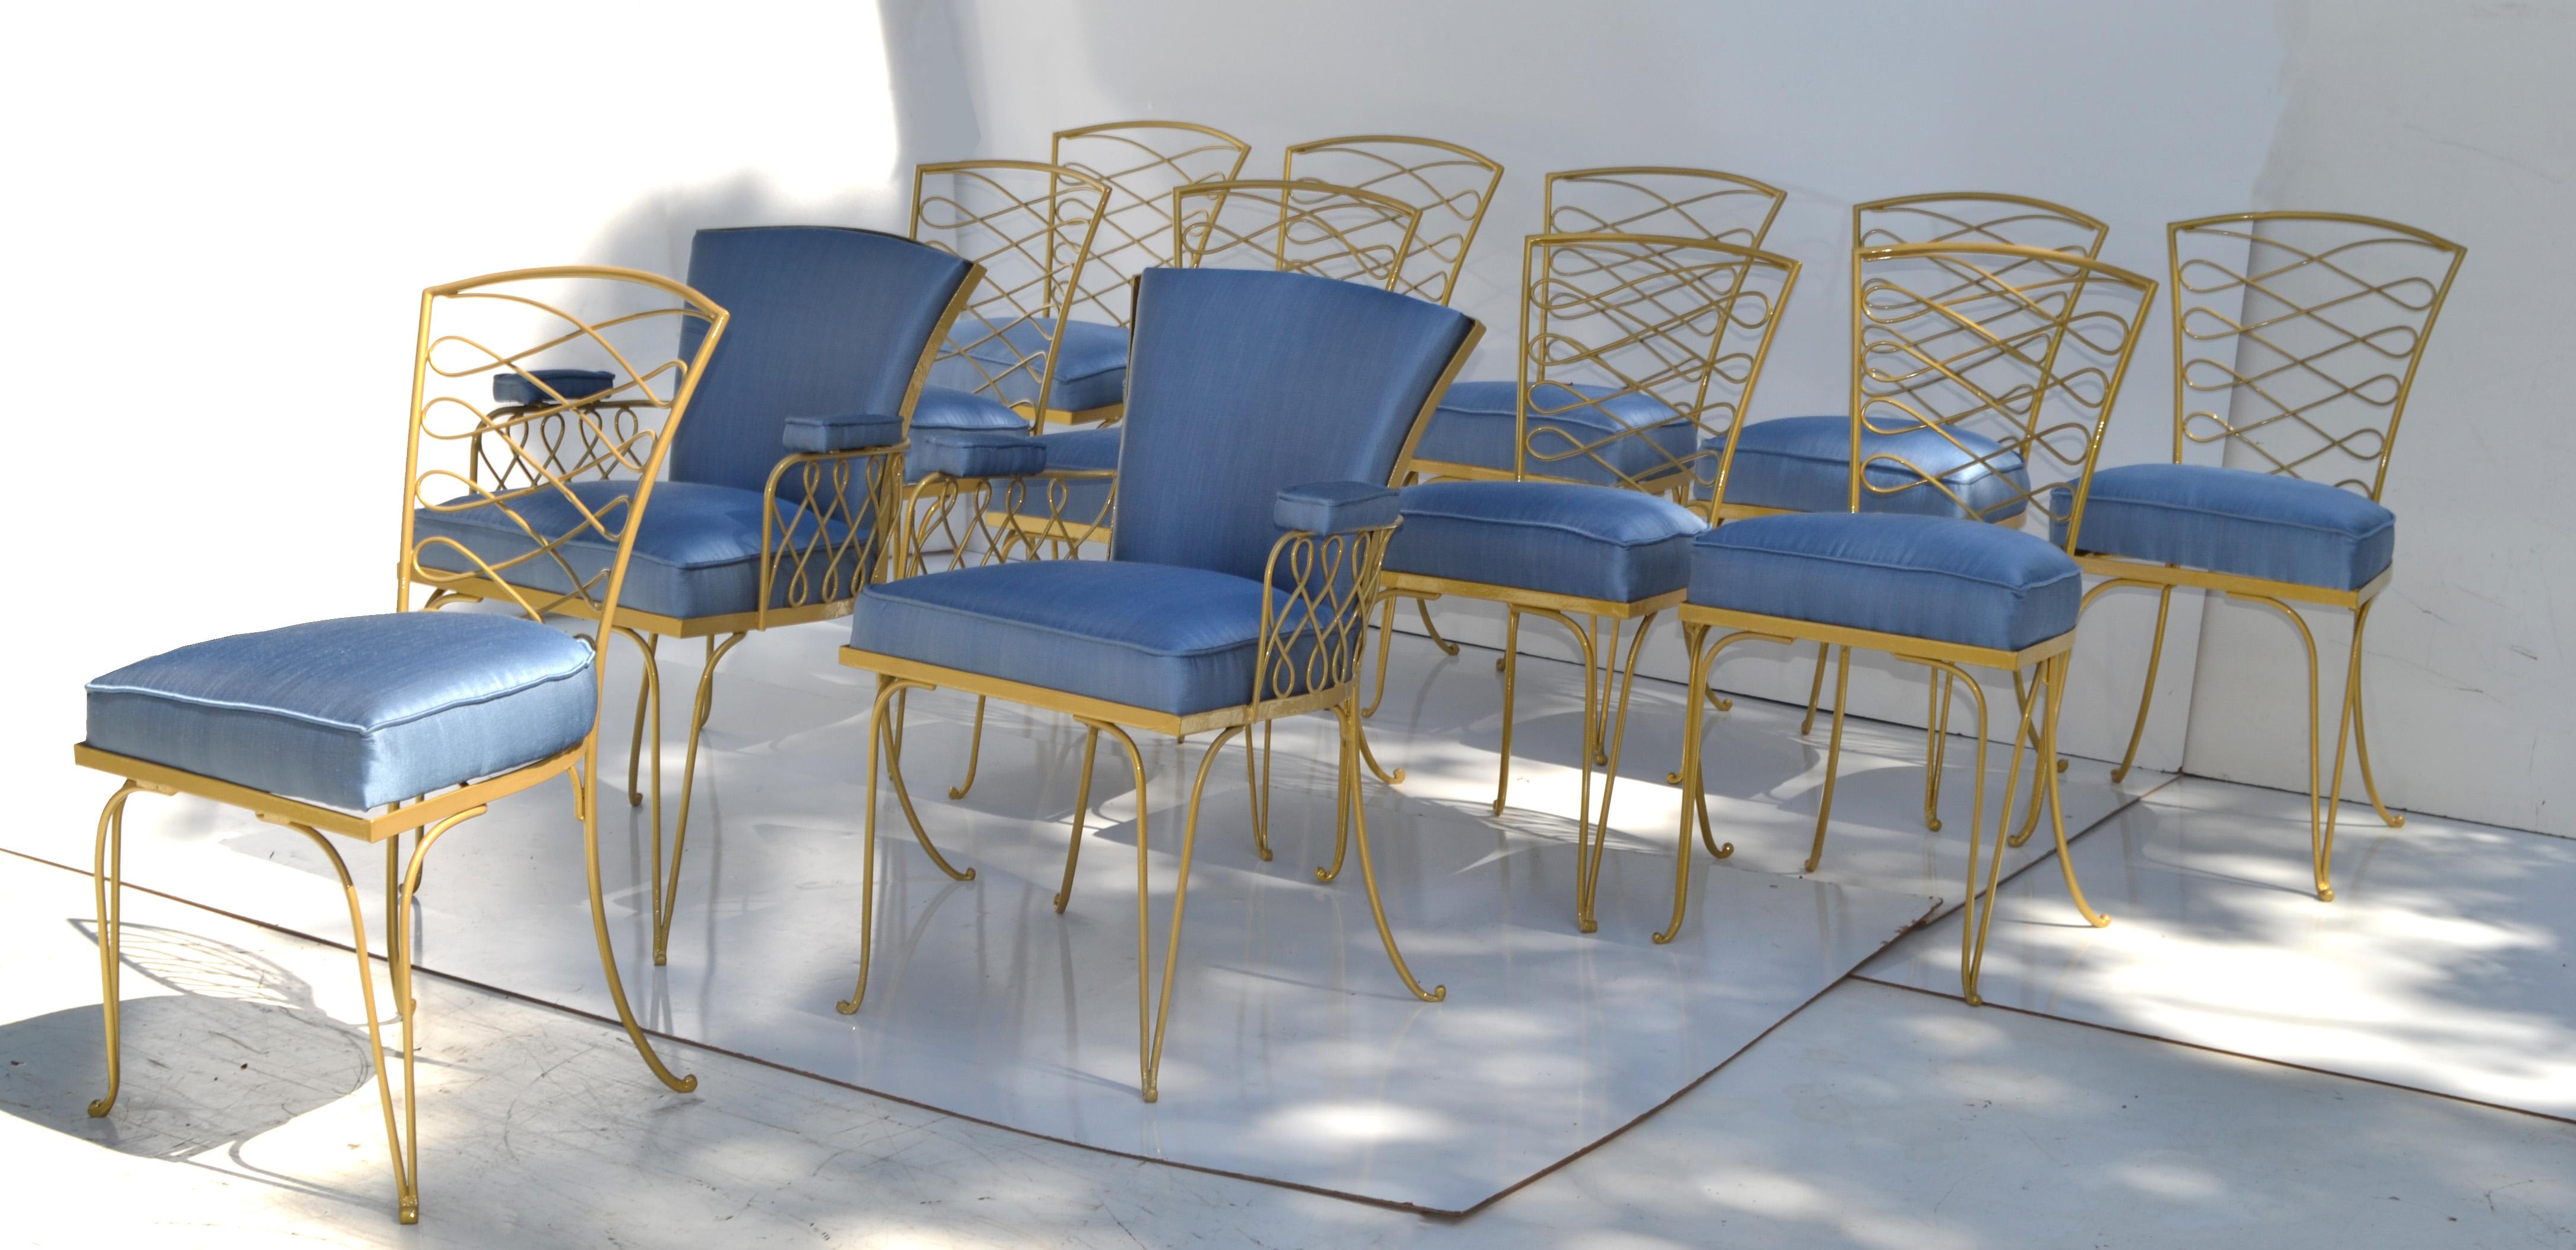 Hand-Crafted Set of 14 René Prou Art Deco Gold Wrought Iron Dining Room Chairs Blue Fabric  For Sale